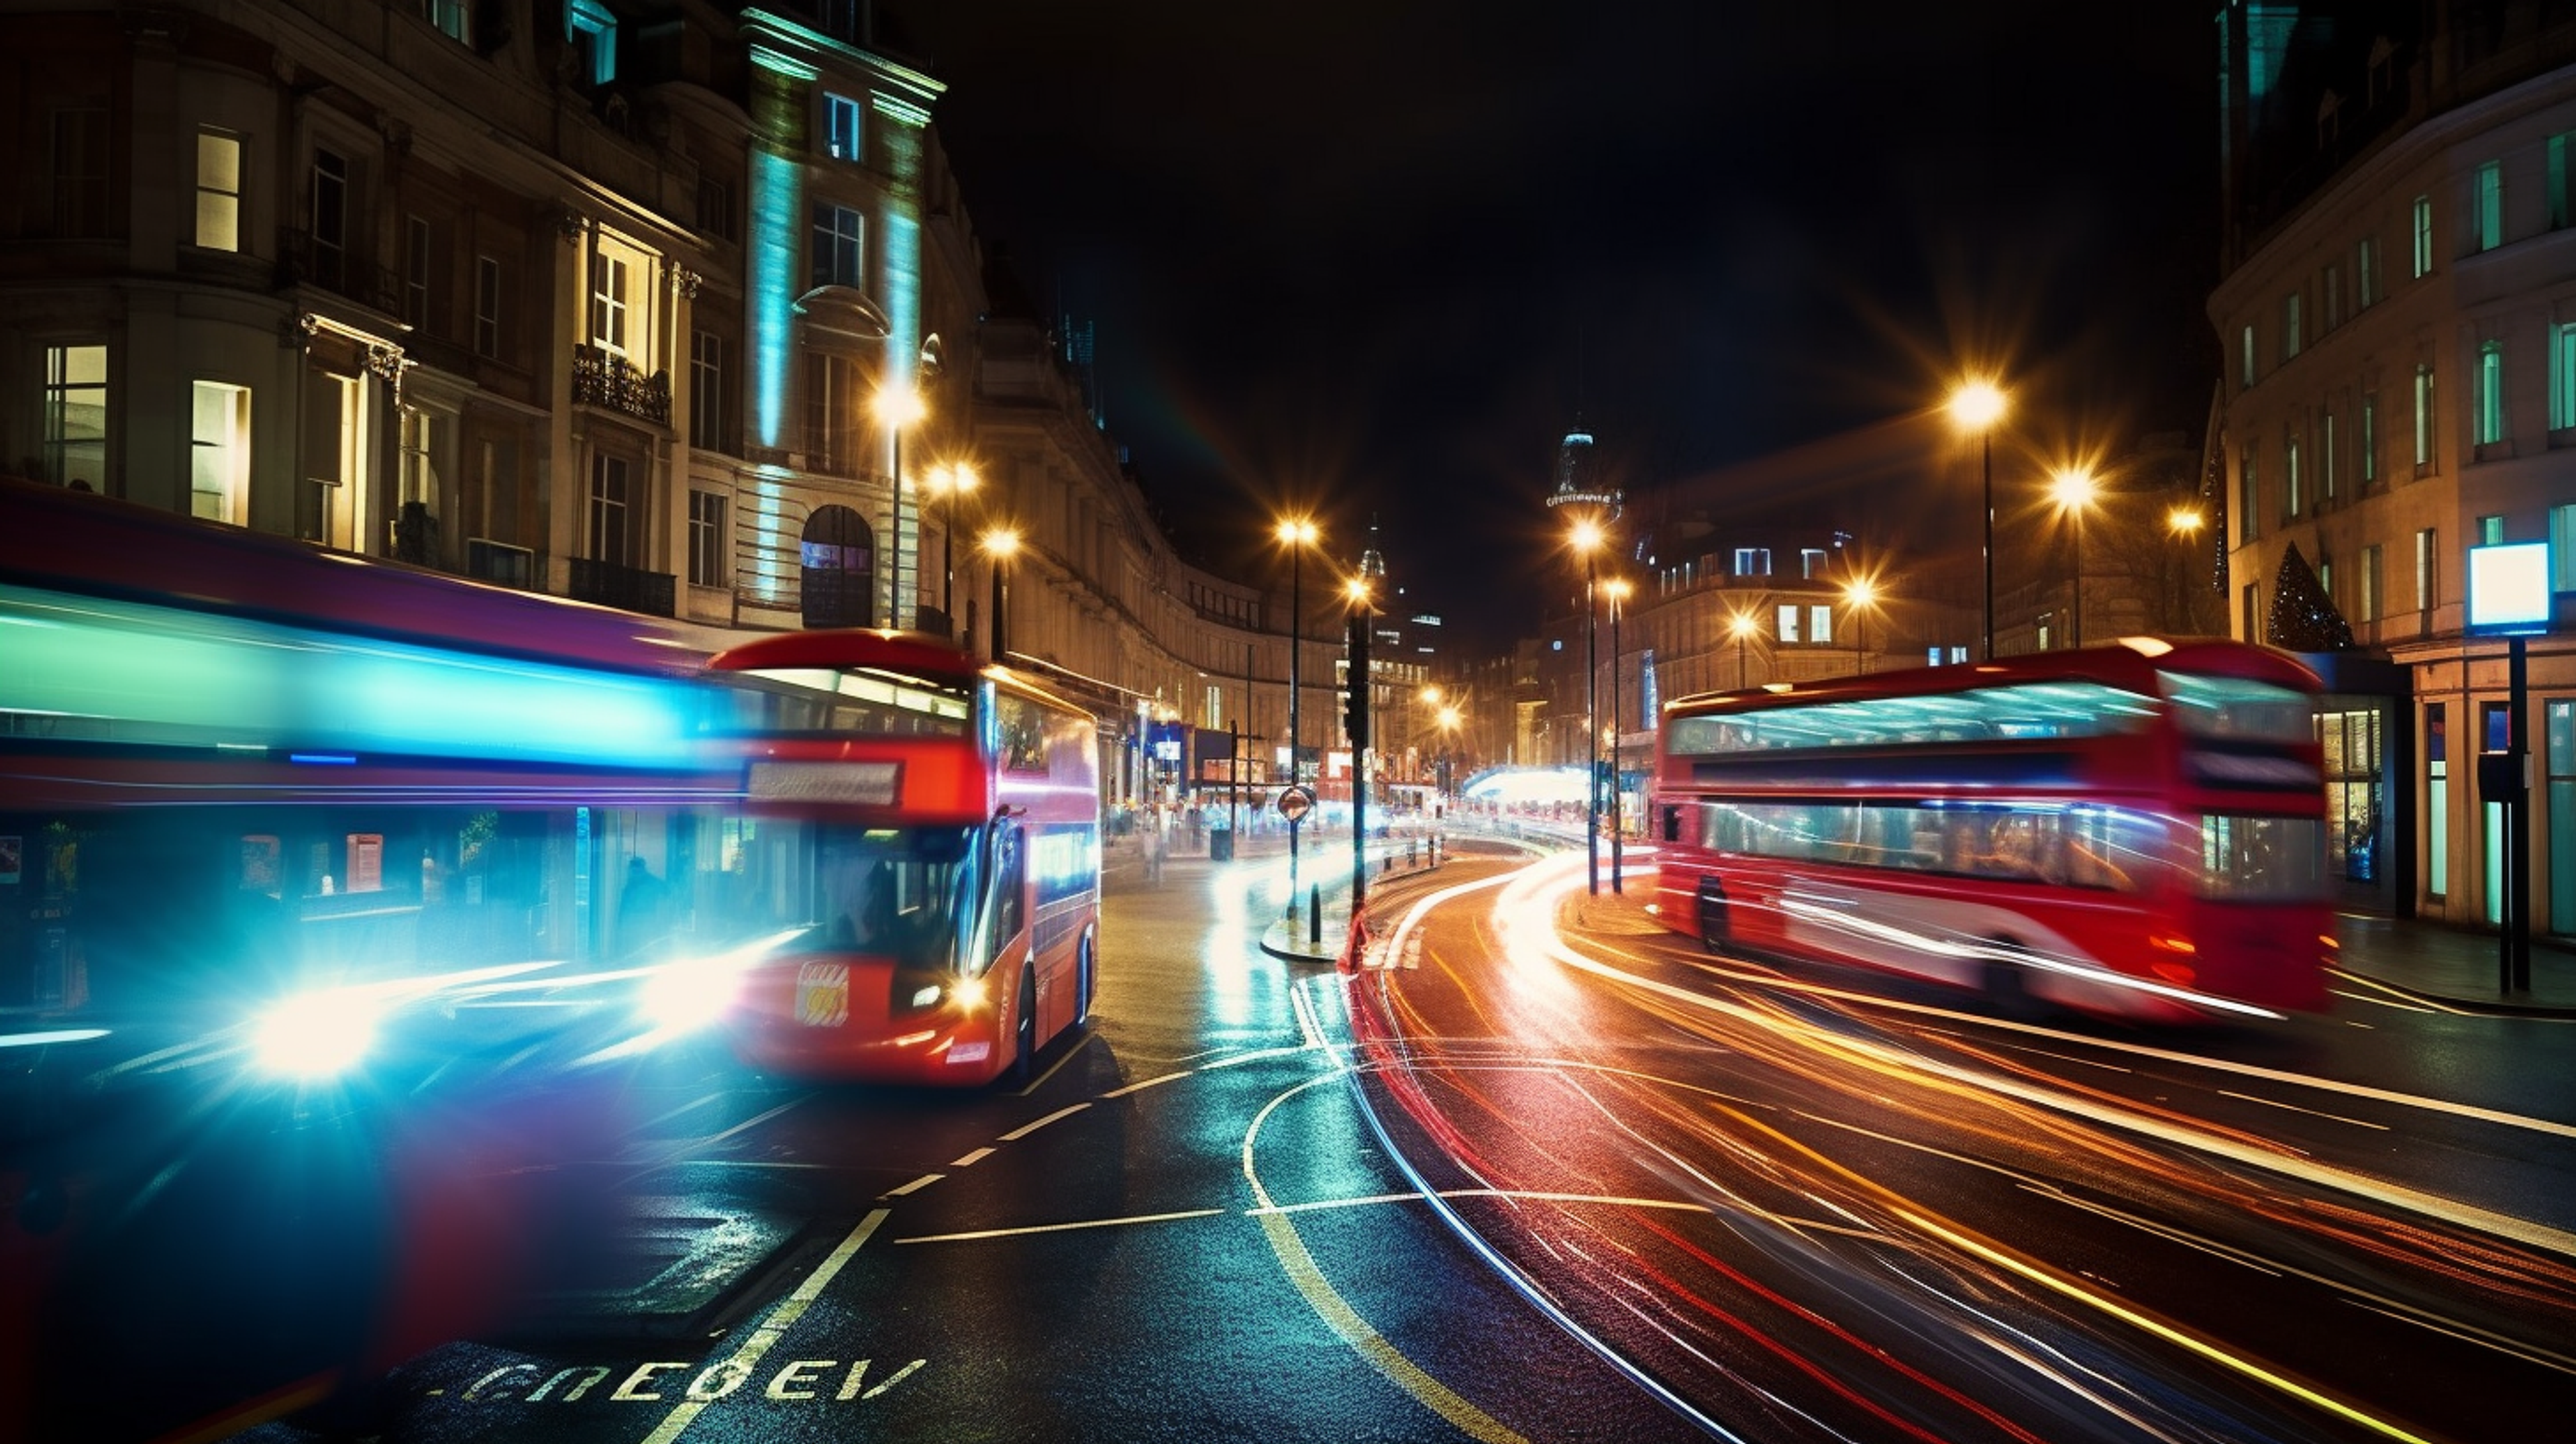 London double decker red busses at night time.